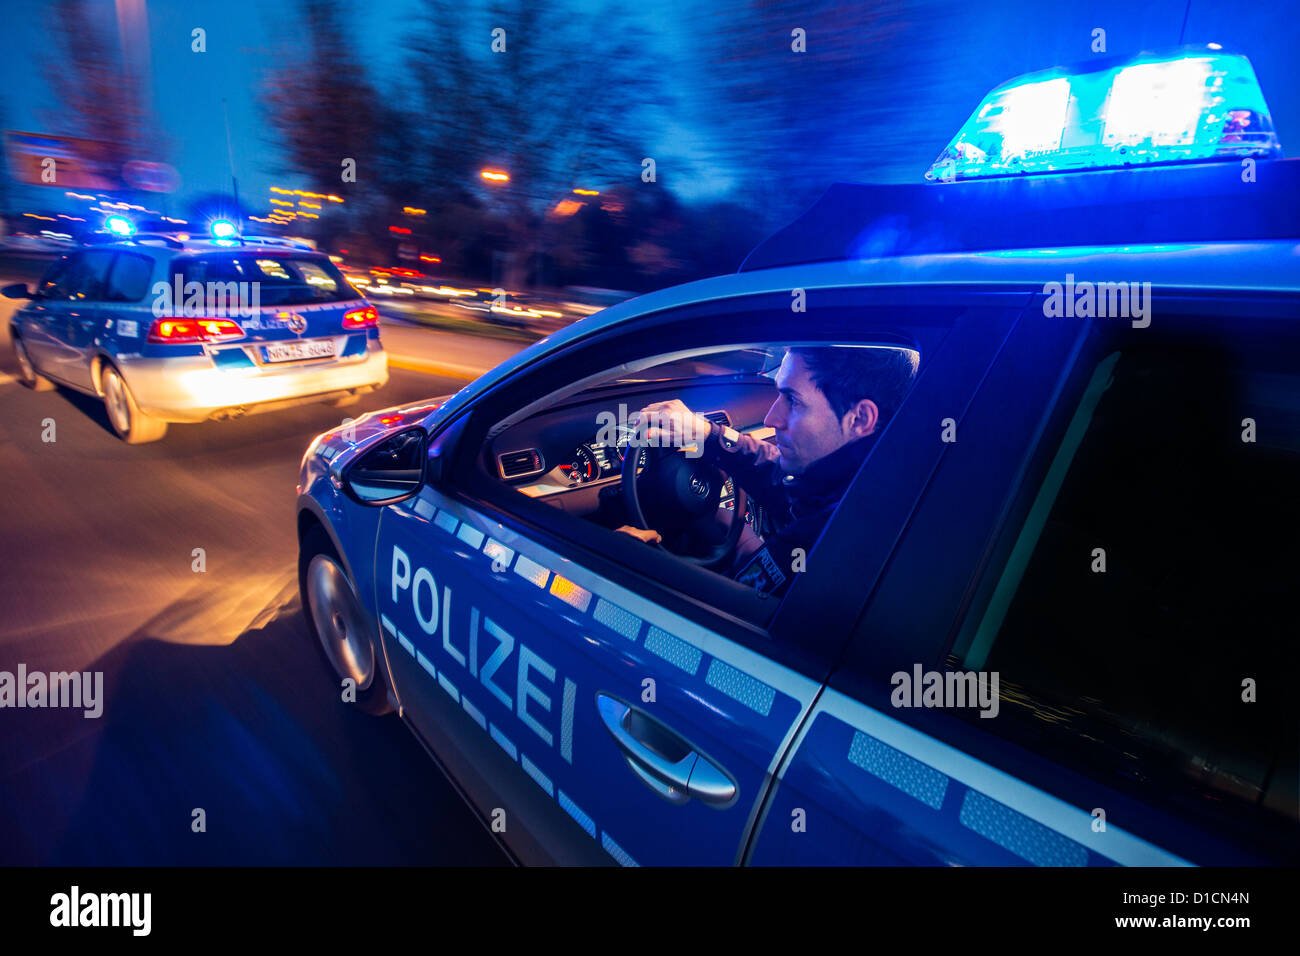 Police patrol car with blue flashing lights, signal horn, driving fast during an emergency mission. Stock Photo